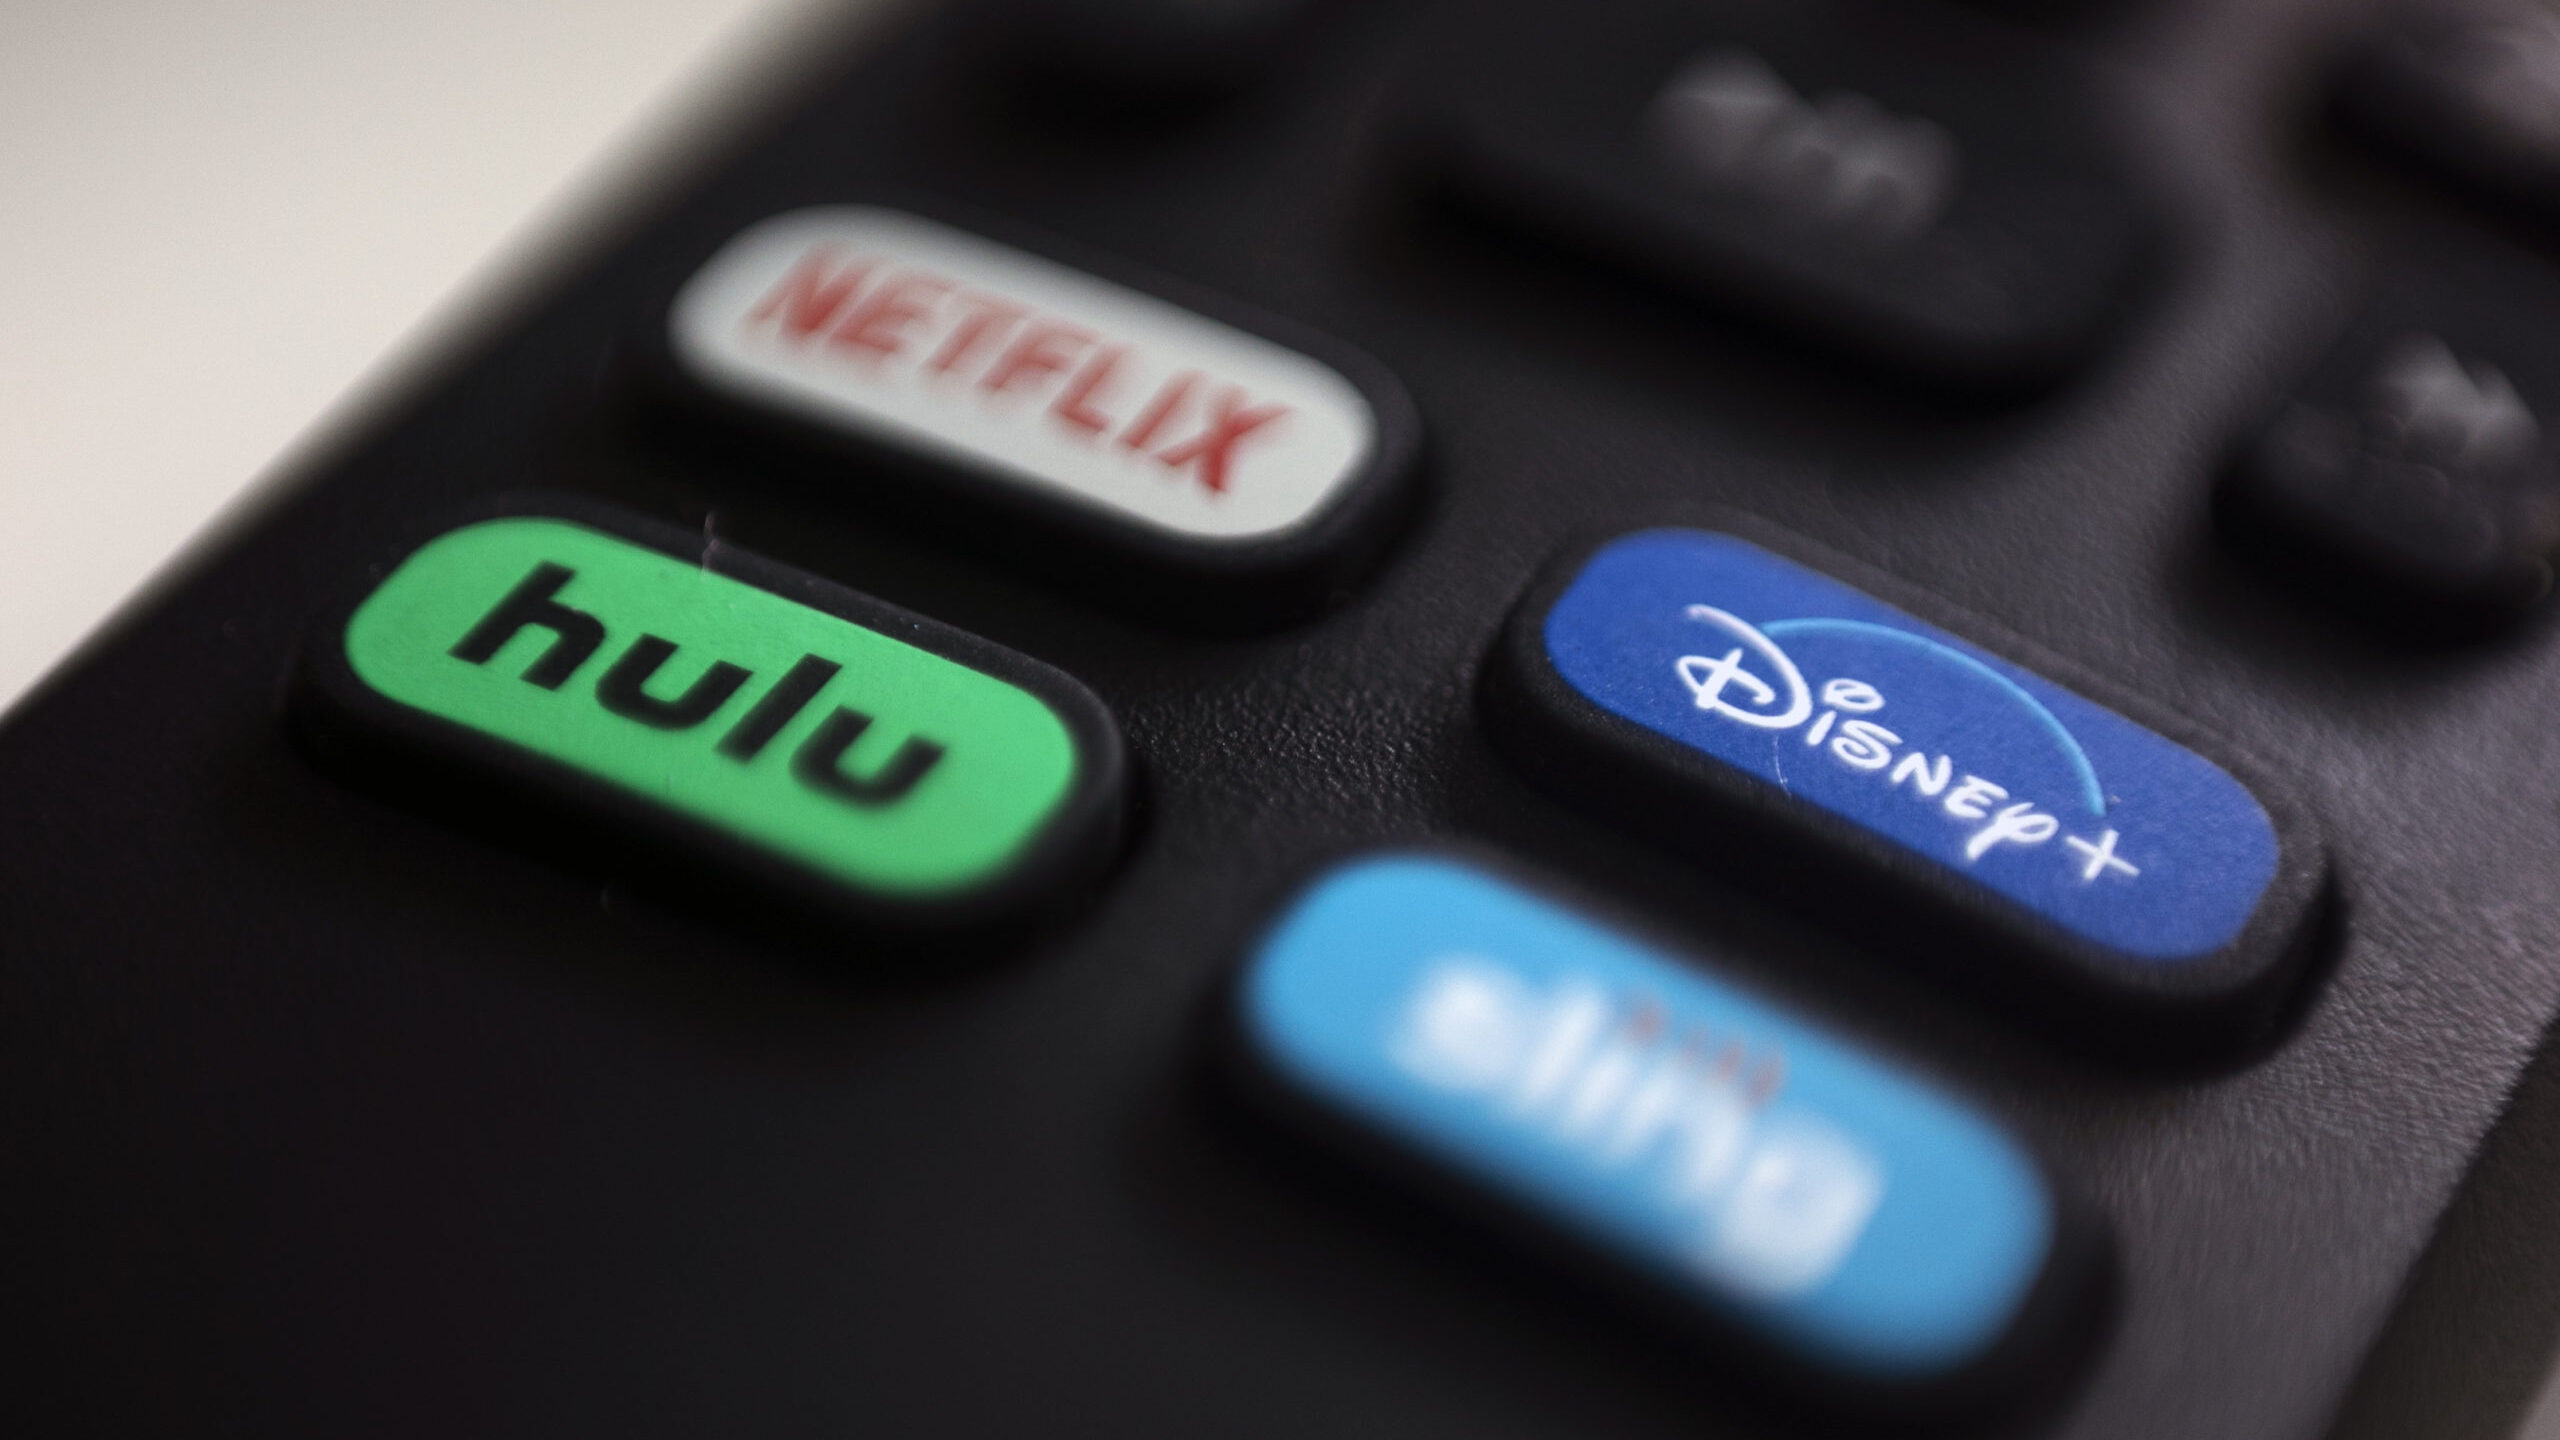 a remote with logos for netflix, hulu, disney and sling shown...